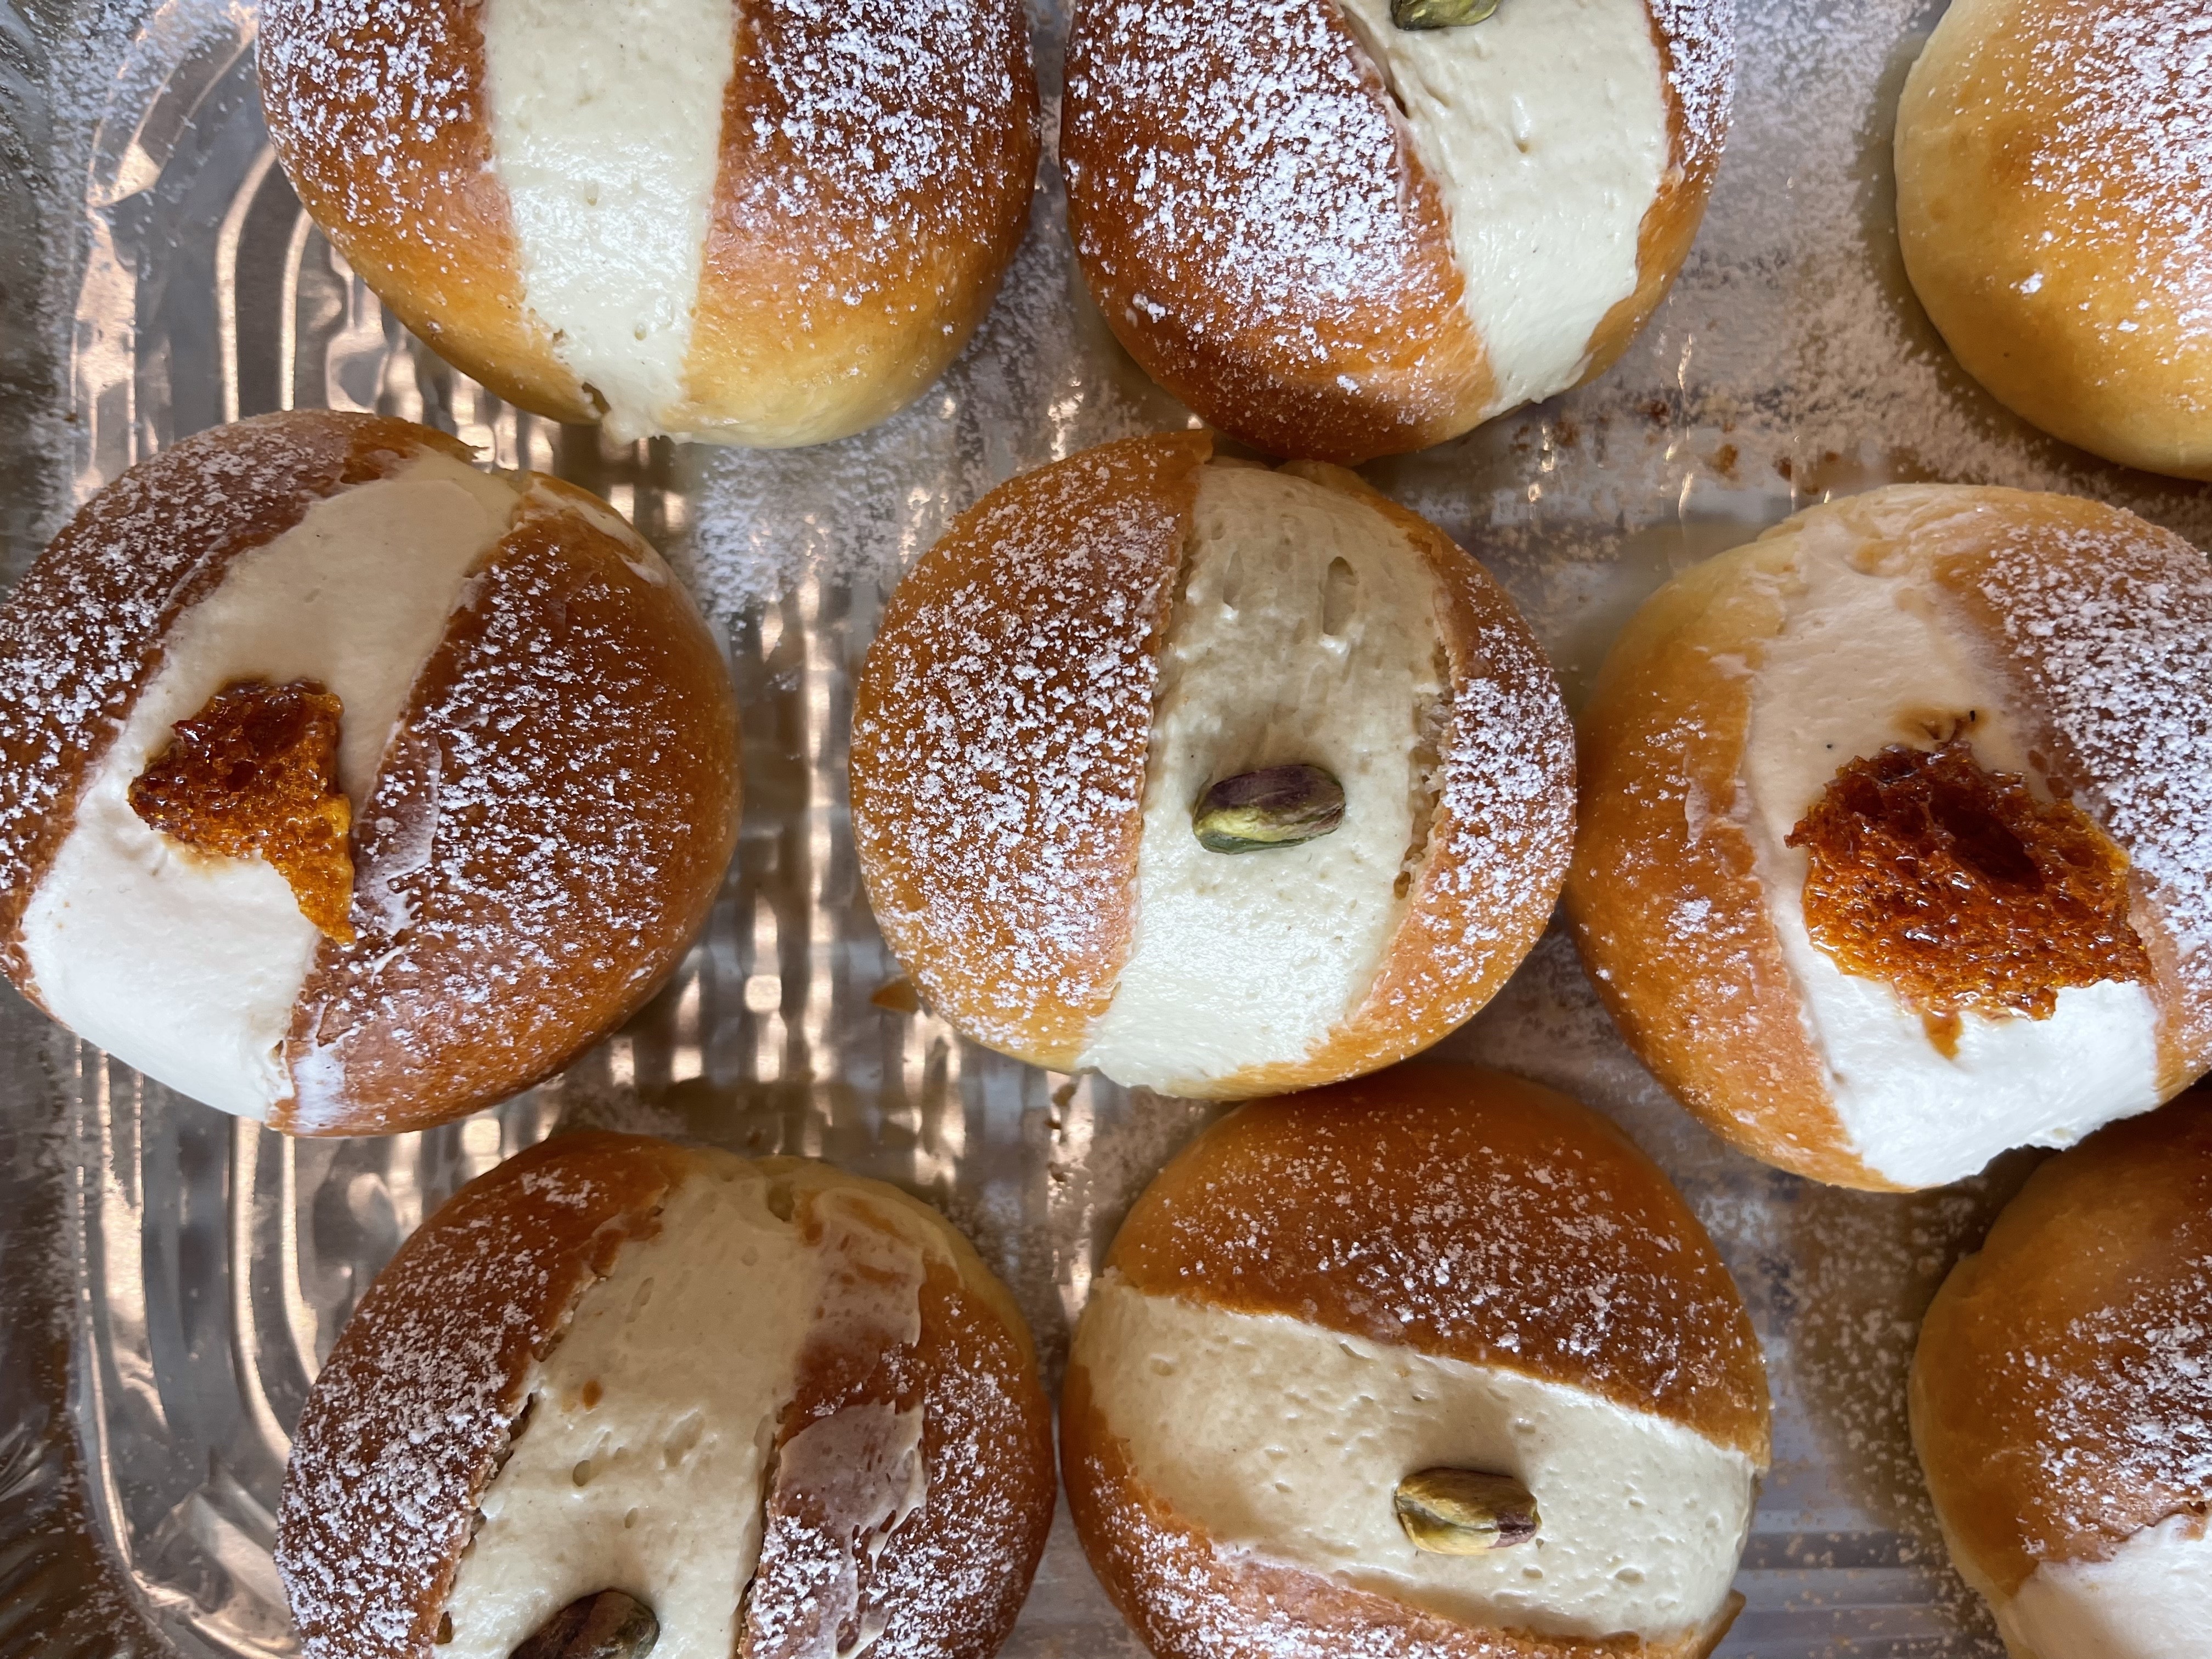 Maritozzi buns are popping up in Philly